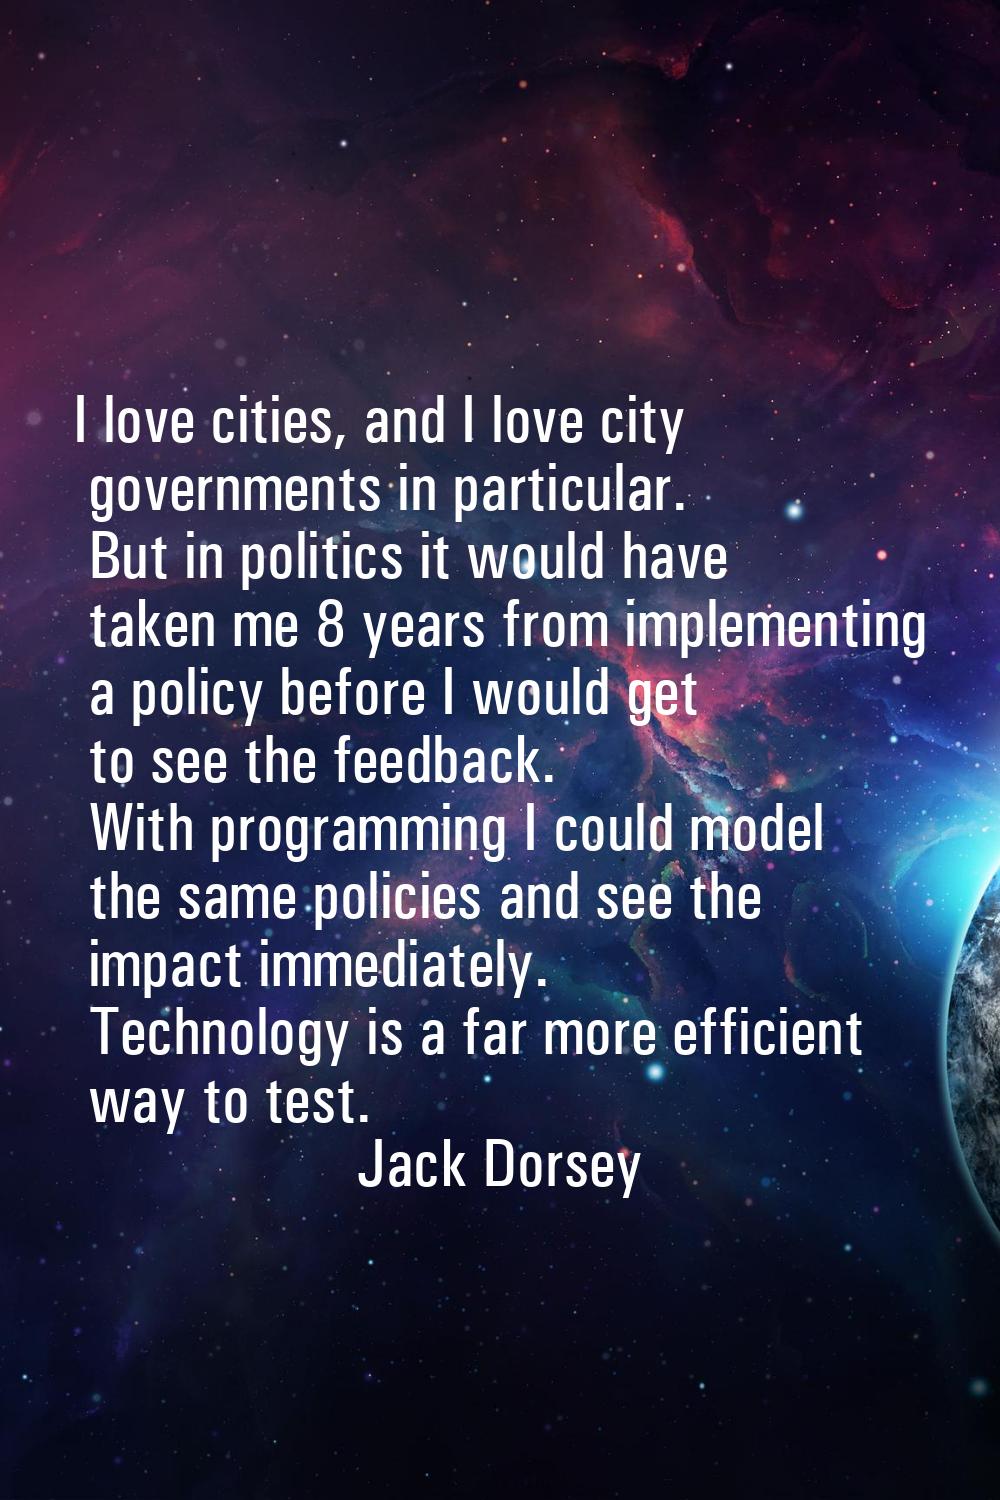 I love cities, and I love city governments in particular. But in politics it would have taken me 8 